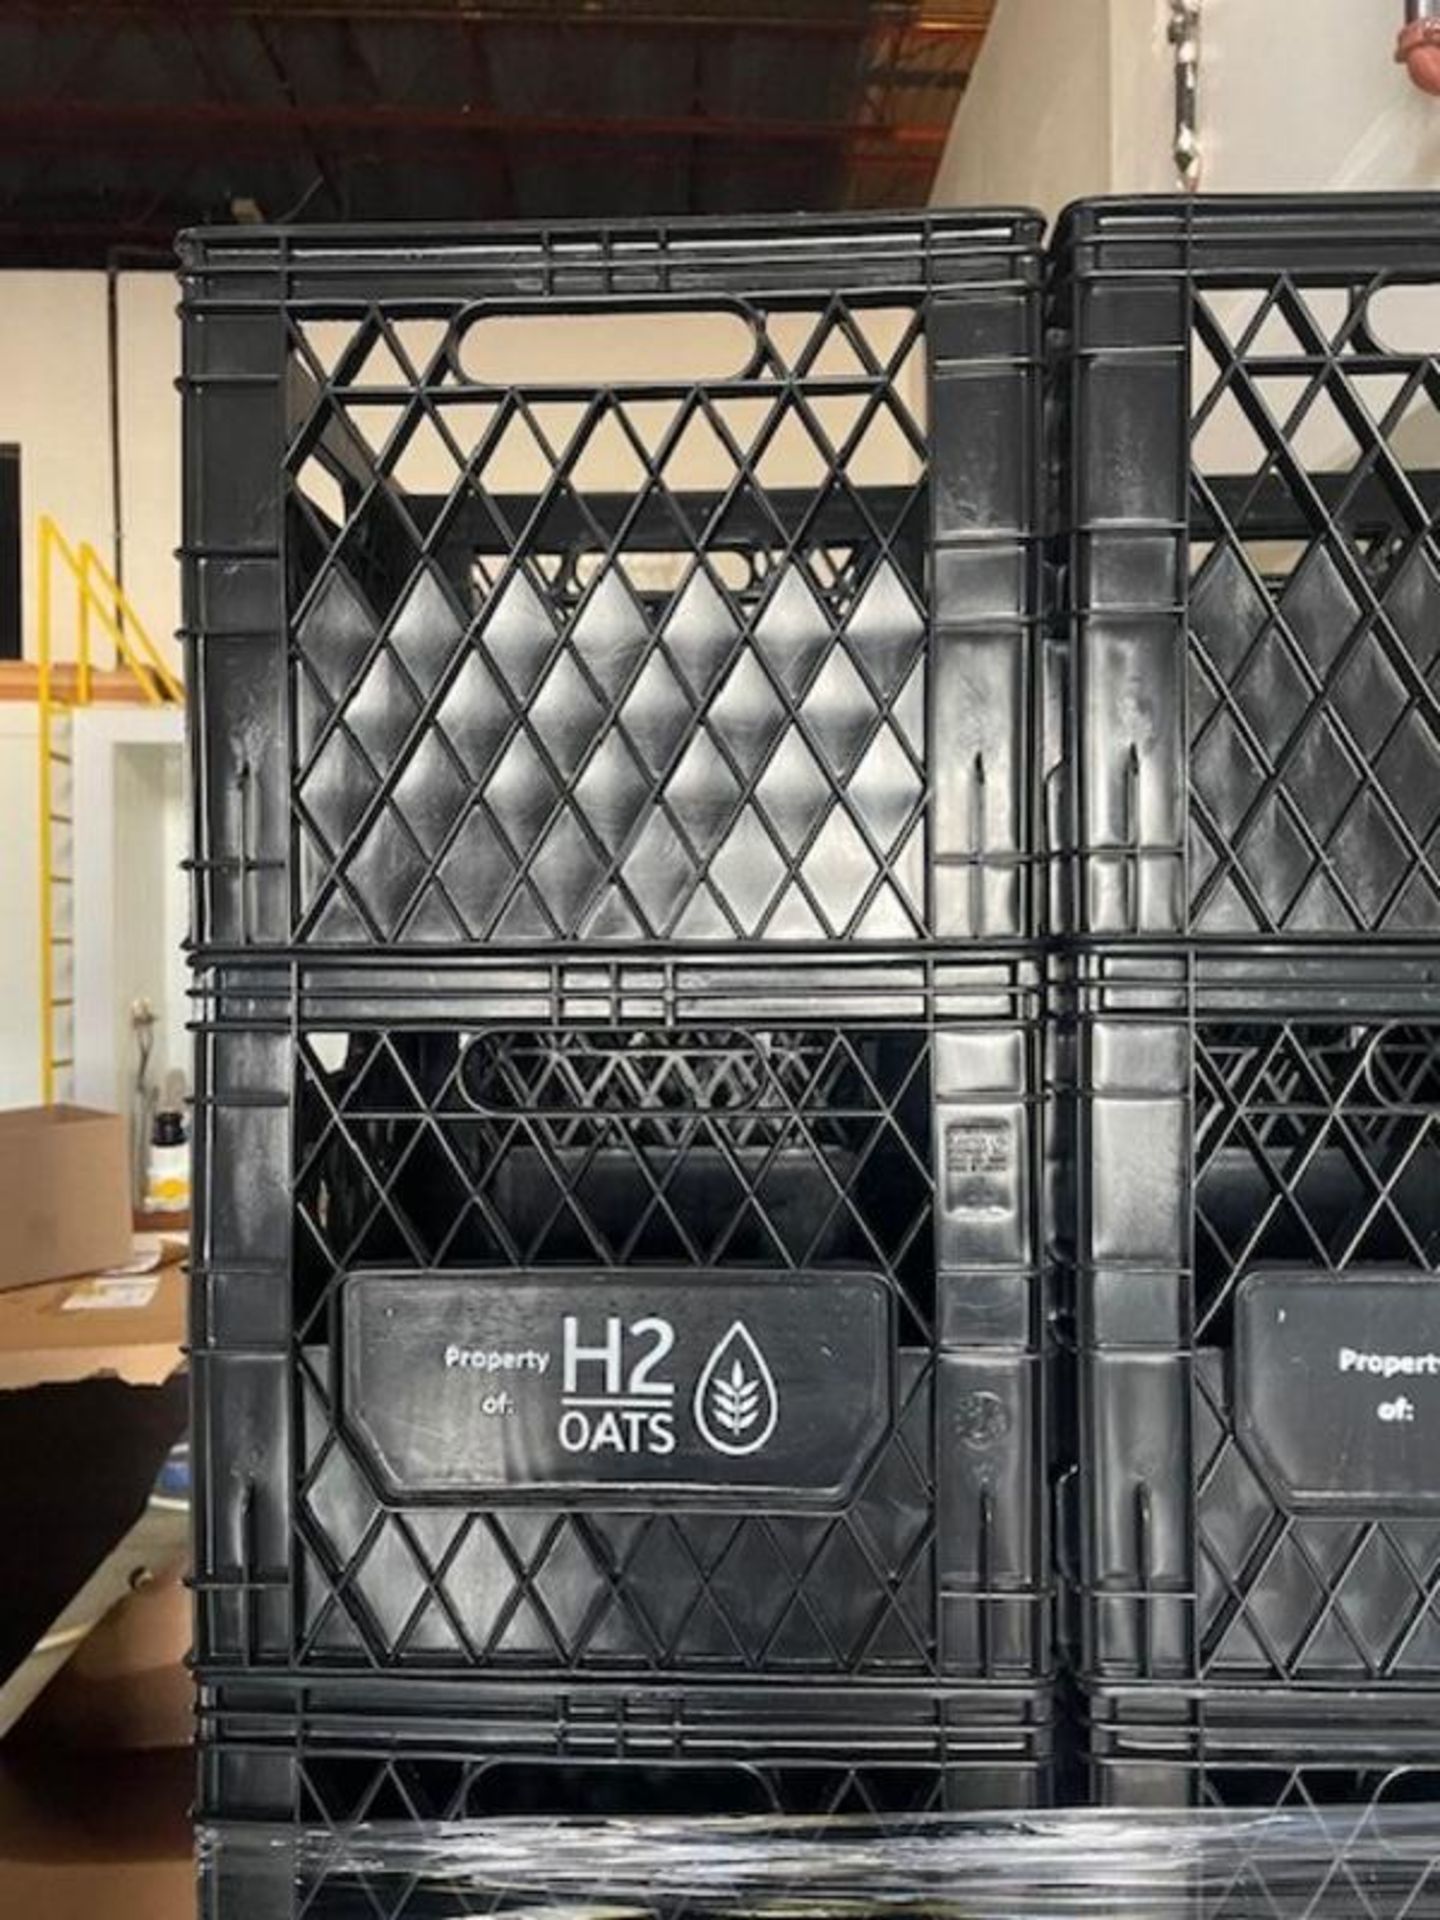 60 Black Milk Crates. Purchased New - Cost $15.50 each - Image 2 of 2